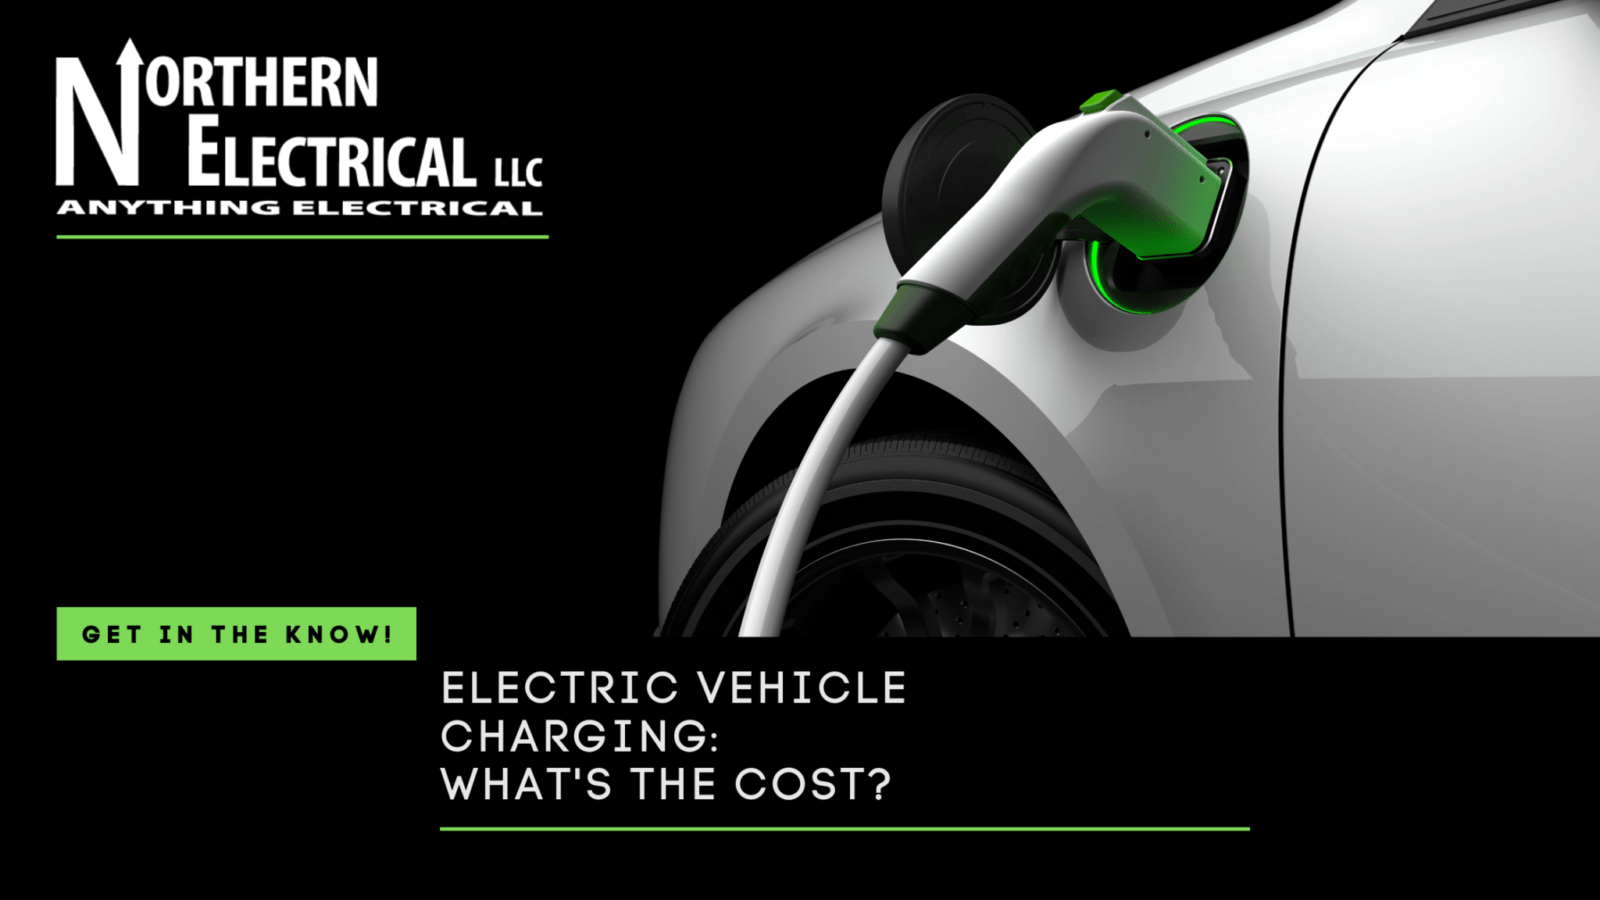 Electric Vehicle Charging - What's the Cost?